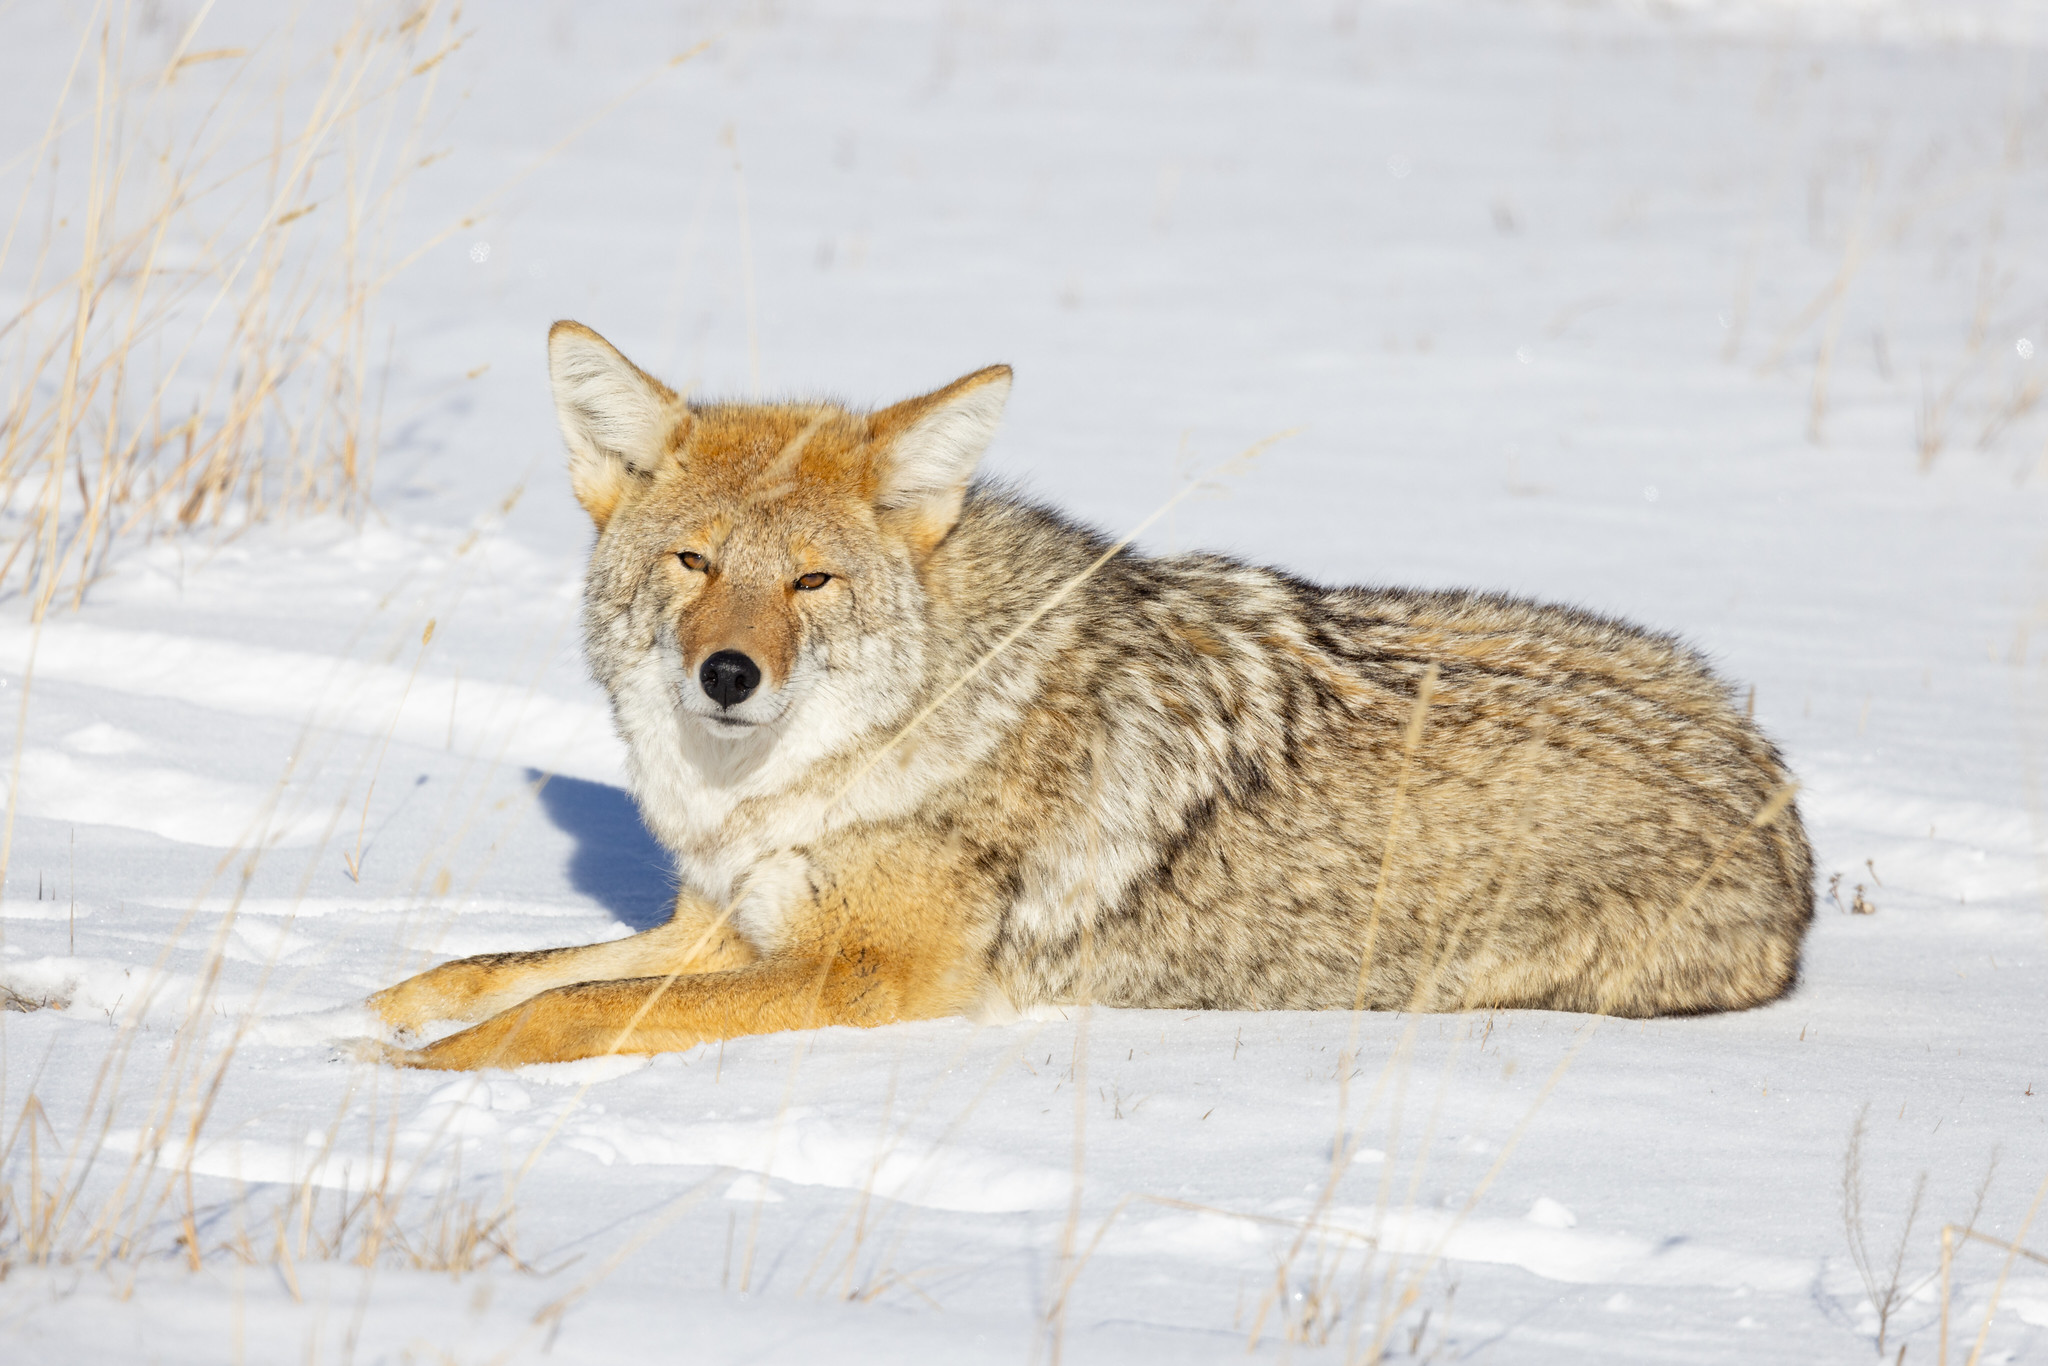 A coyote lays in the snow basking in winter sun.